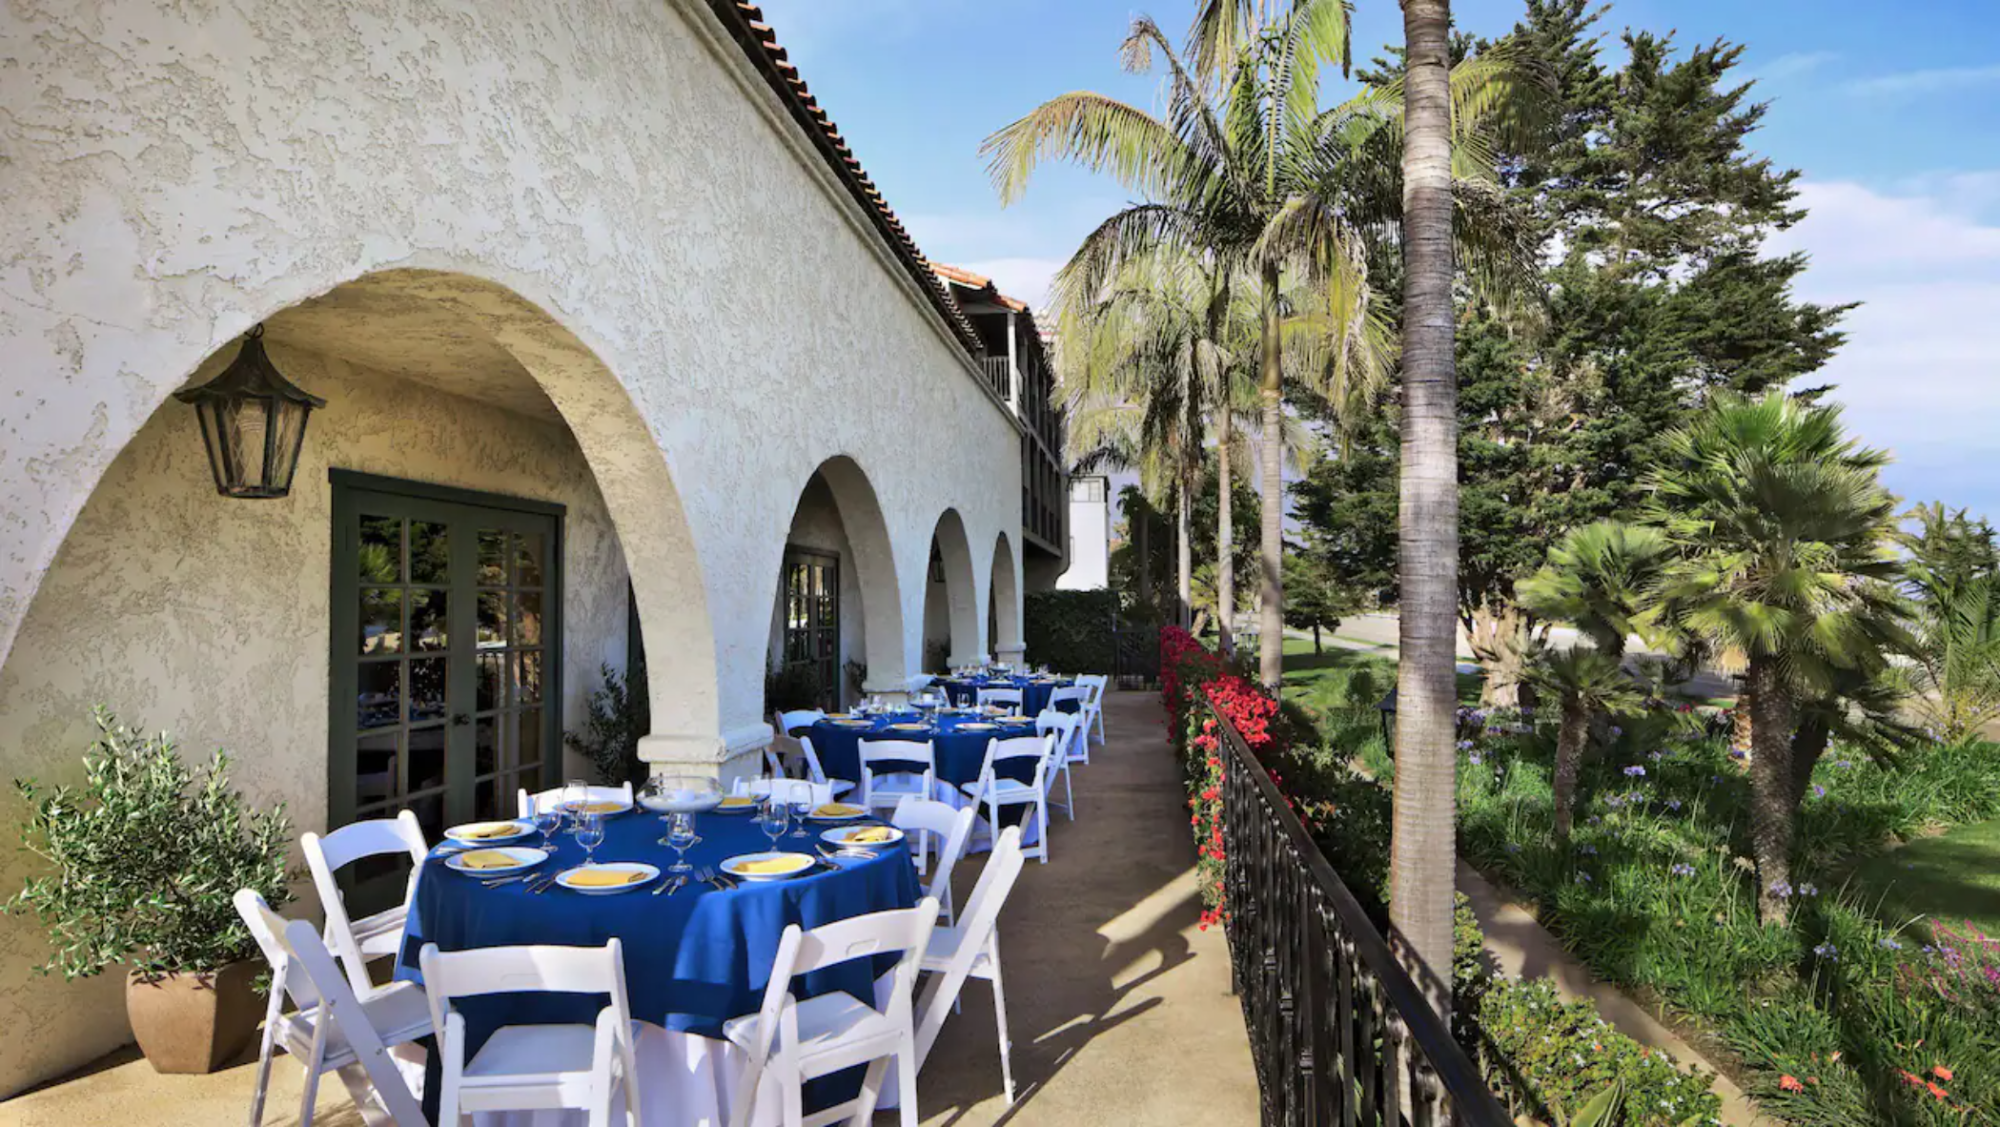 Outdoor seating area with rounded tables, blue linens and white chairs near palm trees at Mar Monte Hotel in Santa Barbara, CA